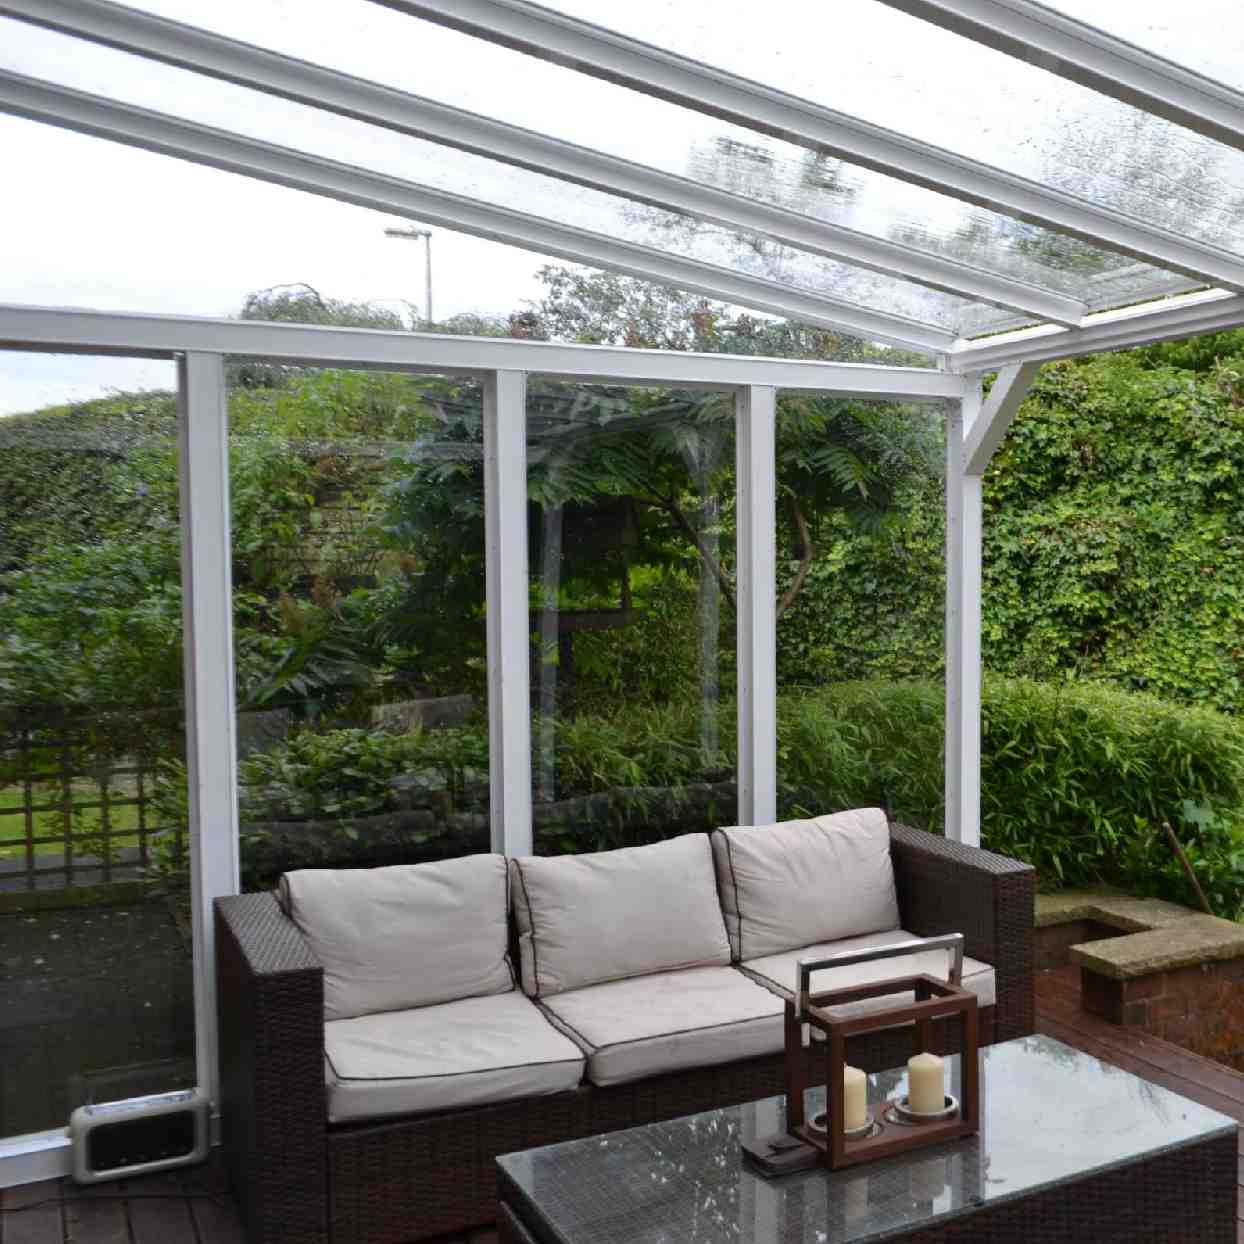 Buy Omega Verandah White with 6mm Glass Clear Plate Polycarbonate Glazing - 2.8m (W) x 1.5m (P), (2) Supporting Posts online today